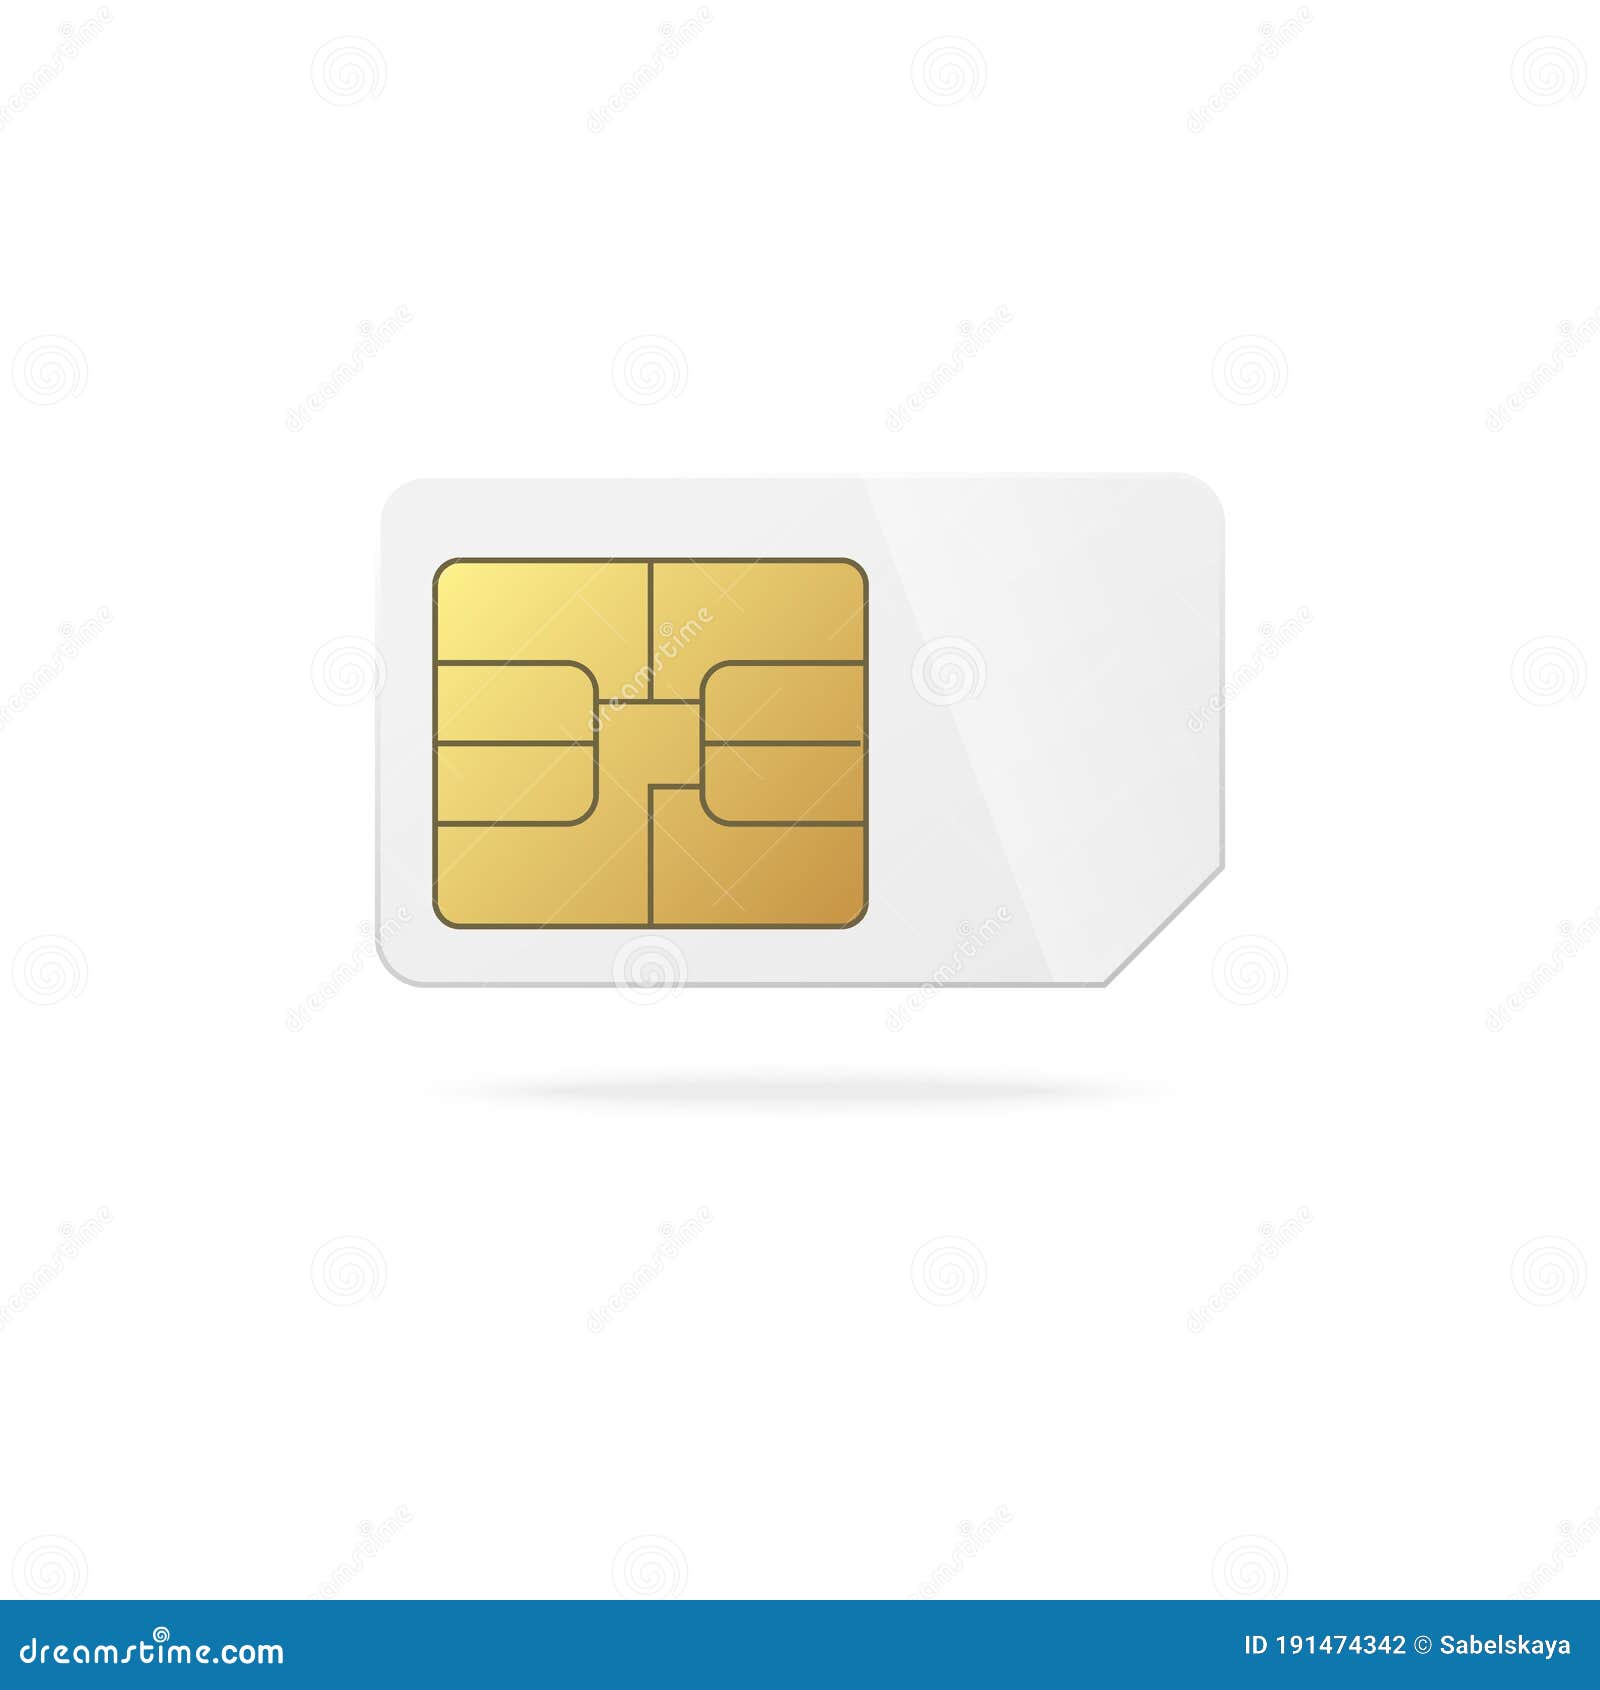 Phone Sim Card Template with Golden Chip, Realistic Vector Throughout Sim Card Template Pdf